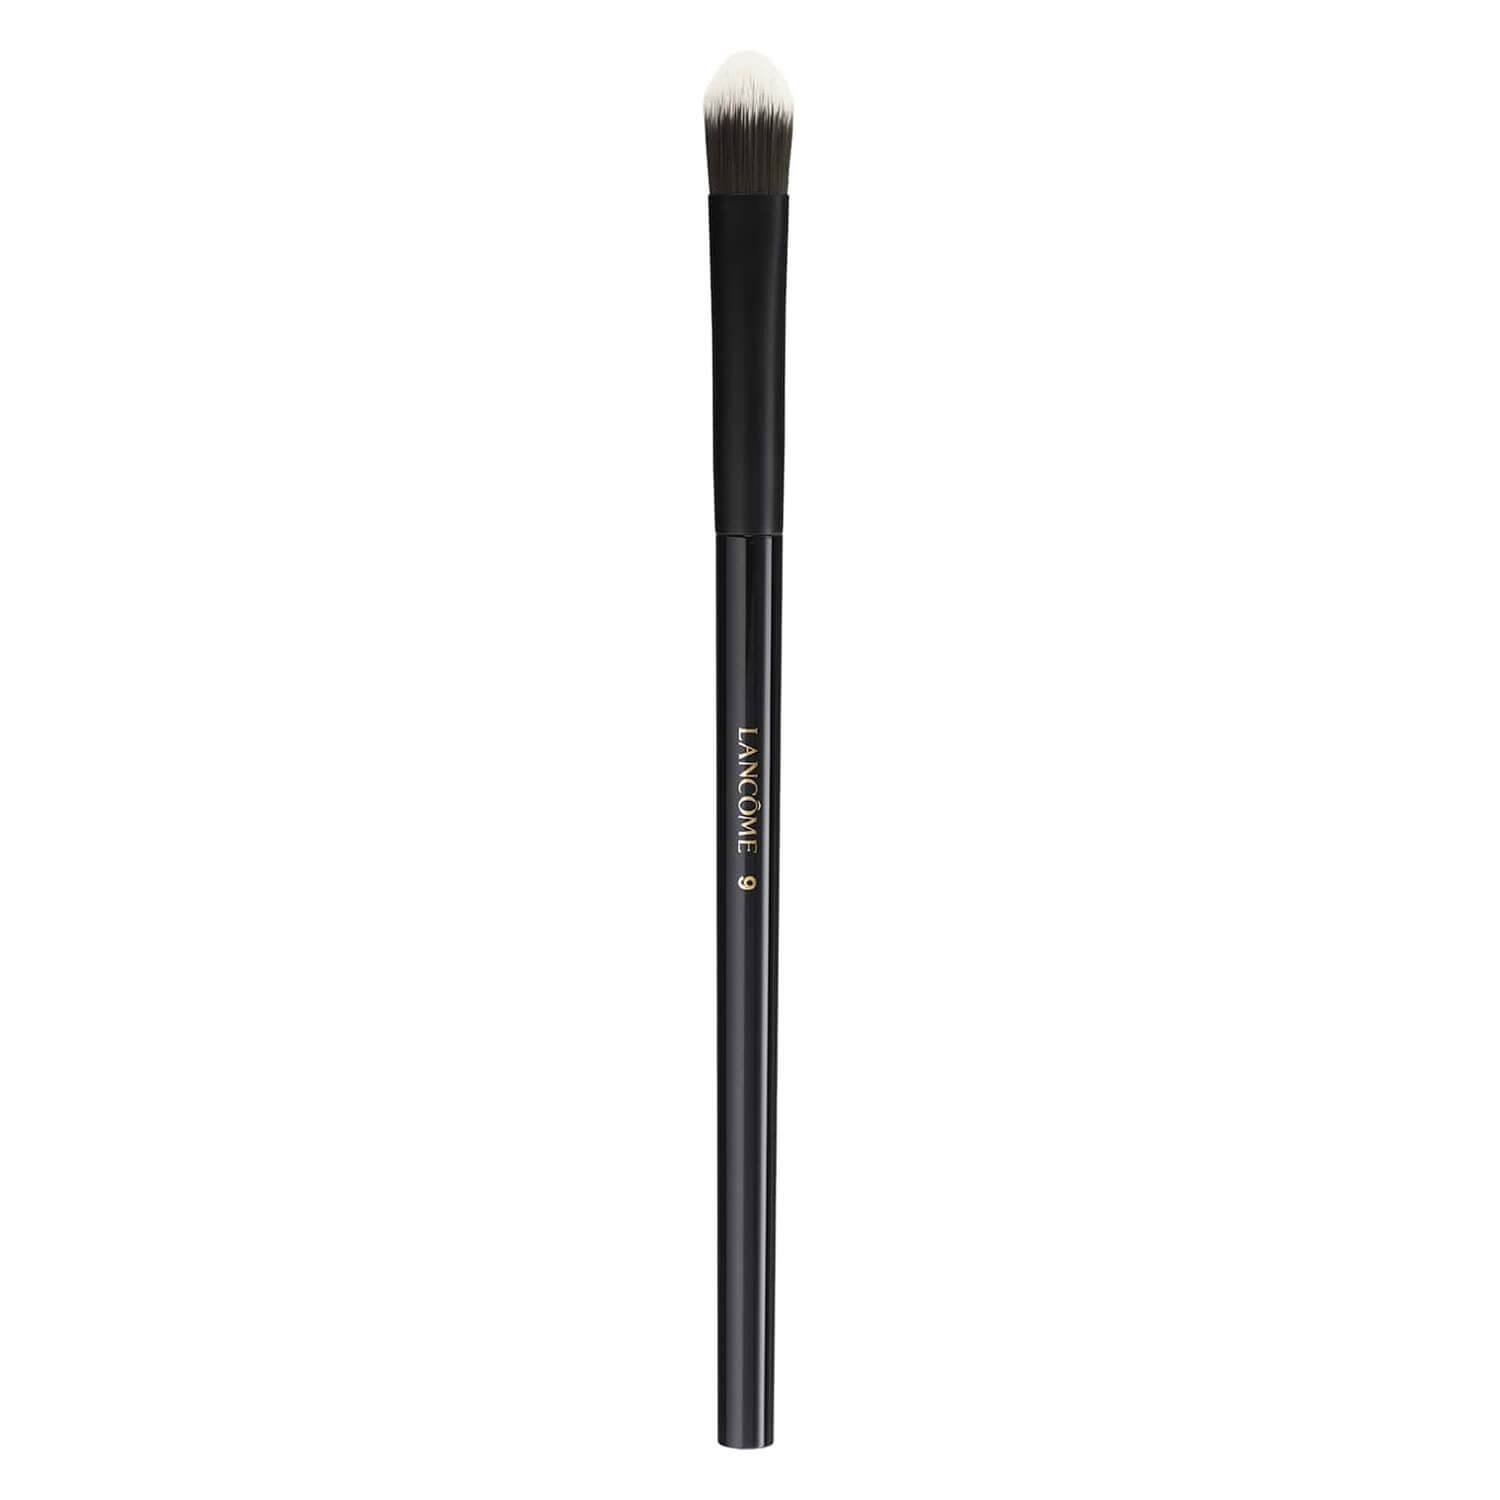 Product image from Lancôme Tools - Conceal & Correct Concealer Brush 09